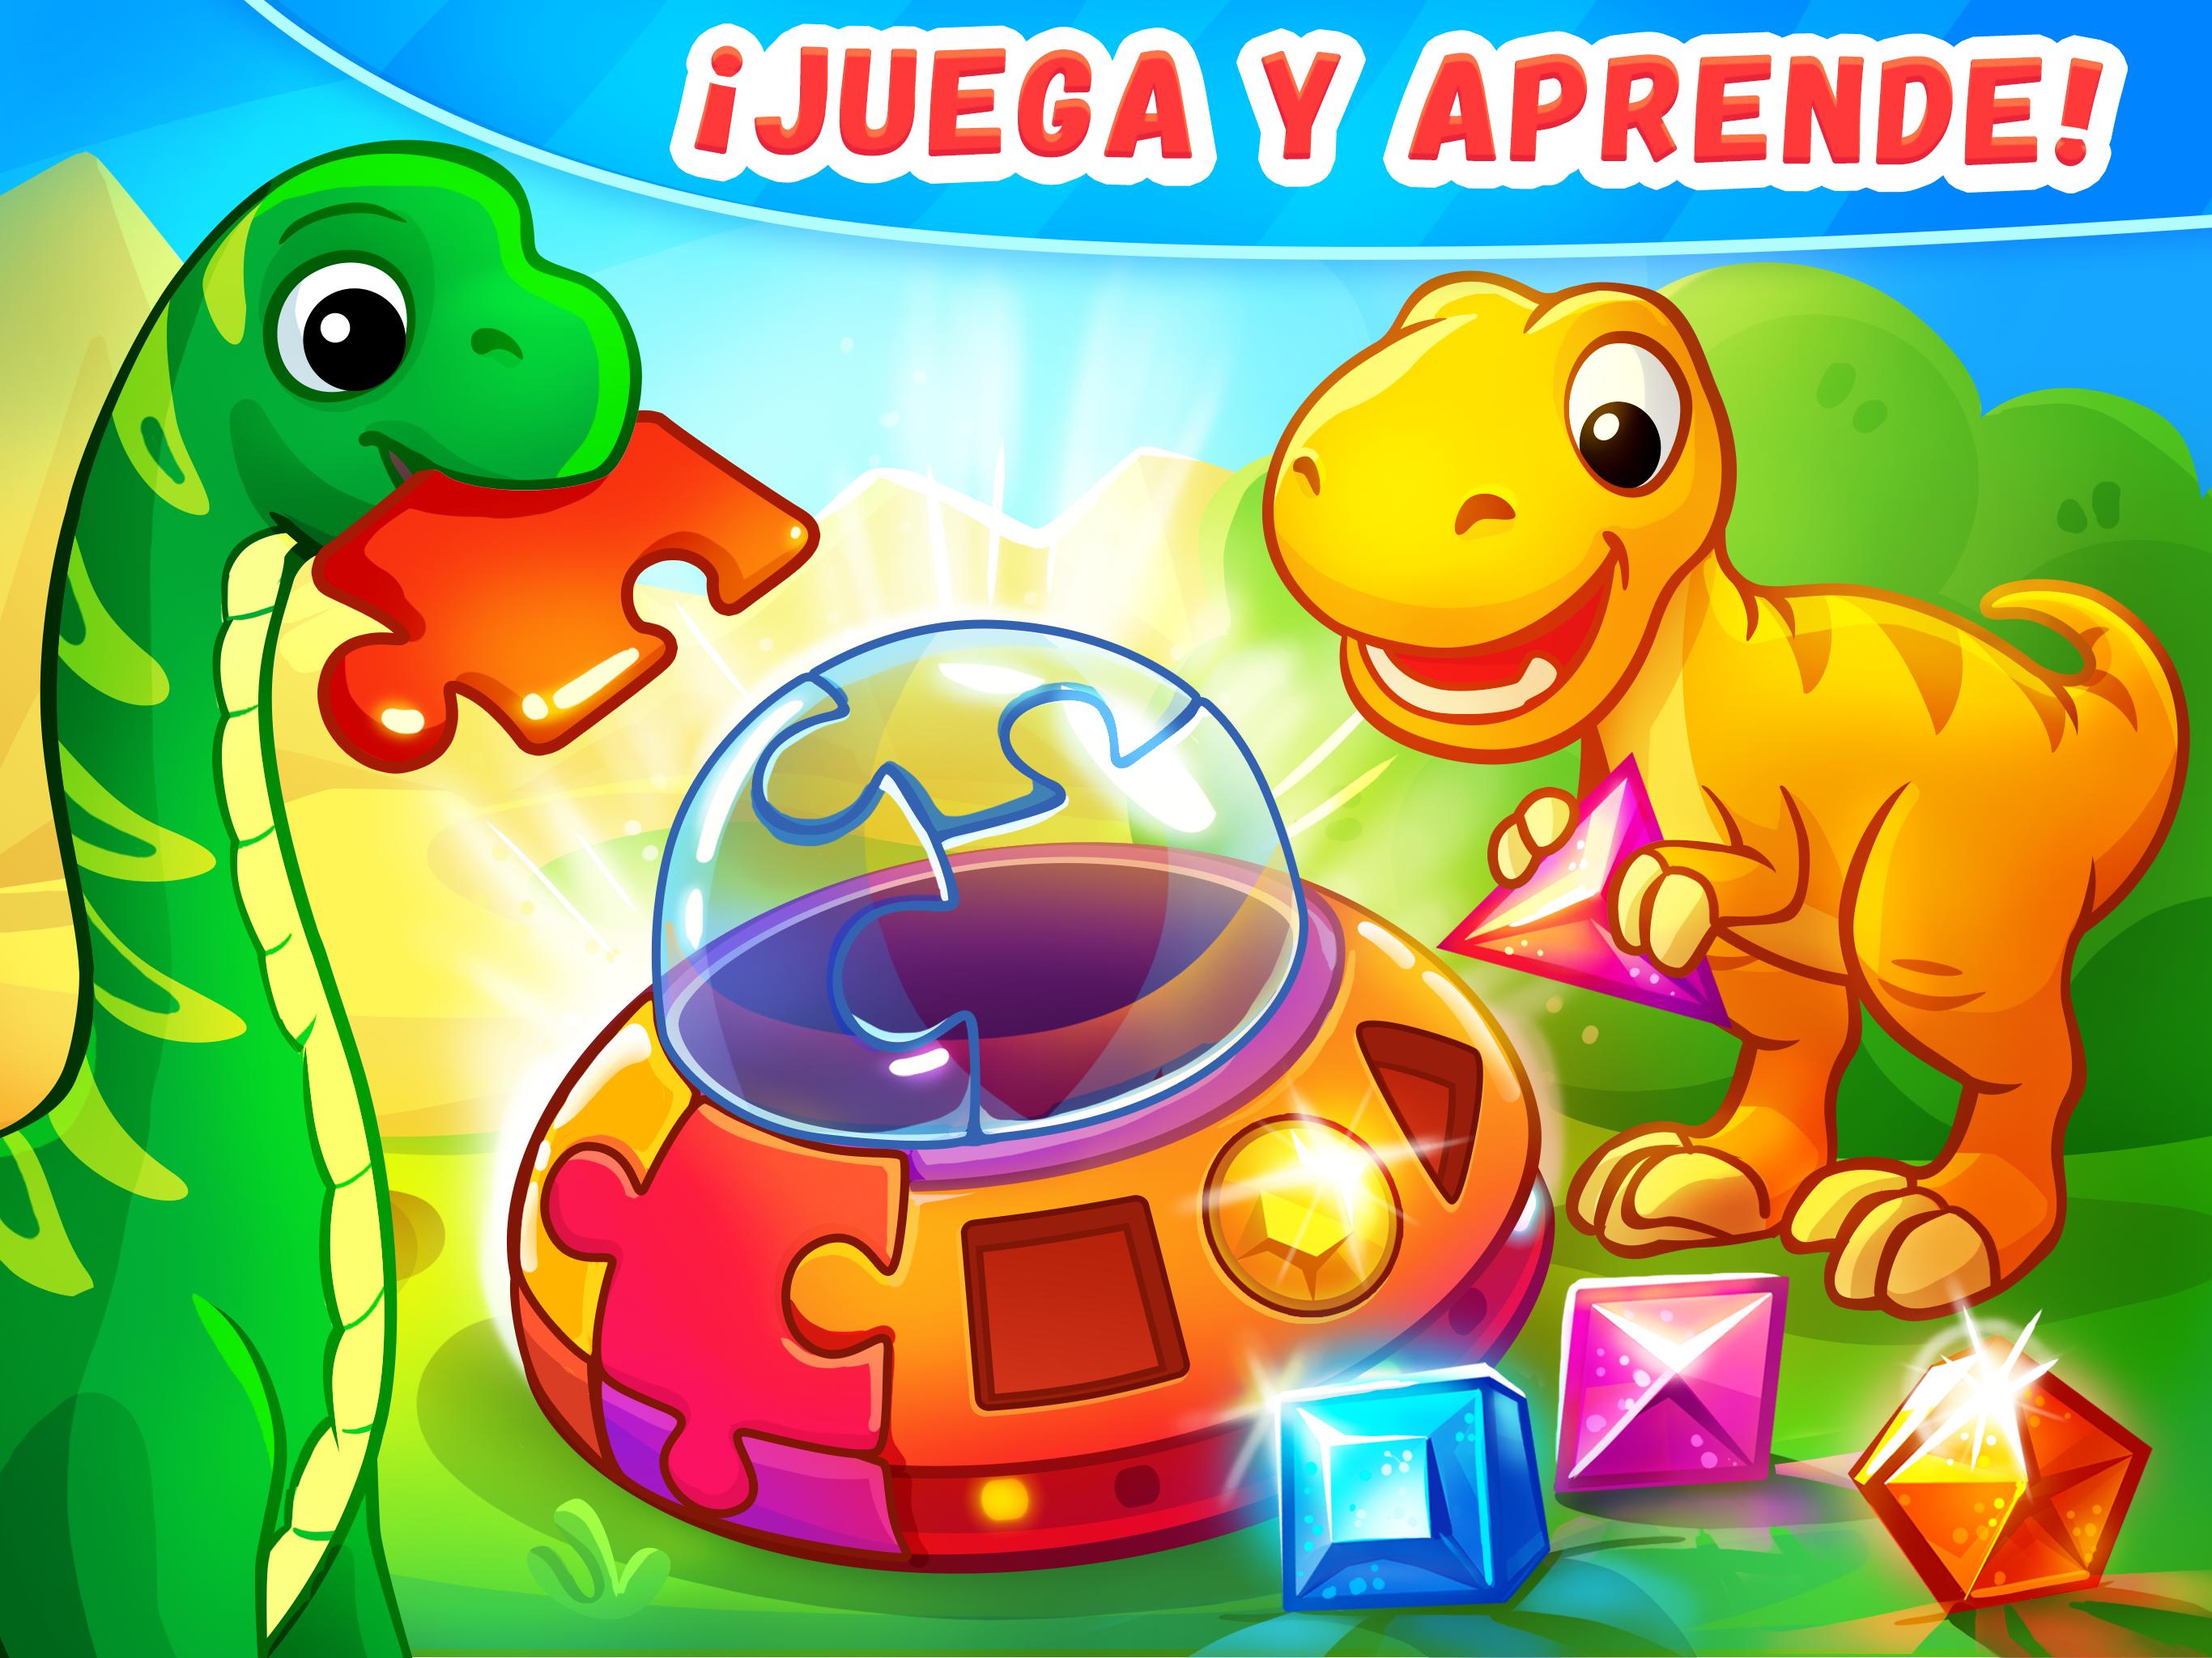 Dinosaurios for Android - APK Download